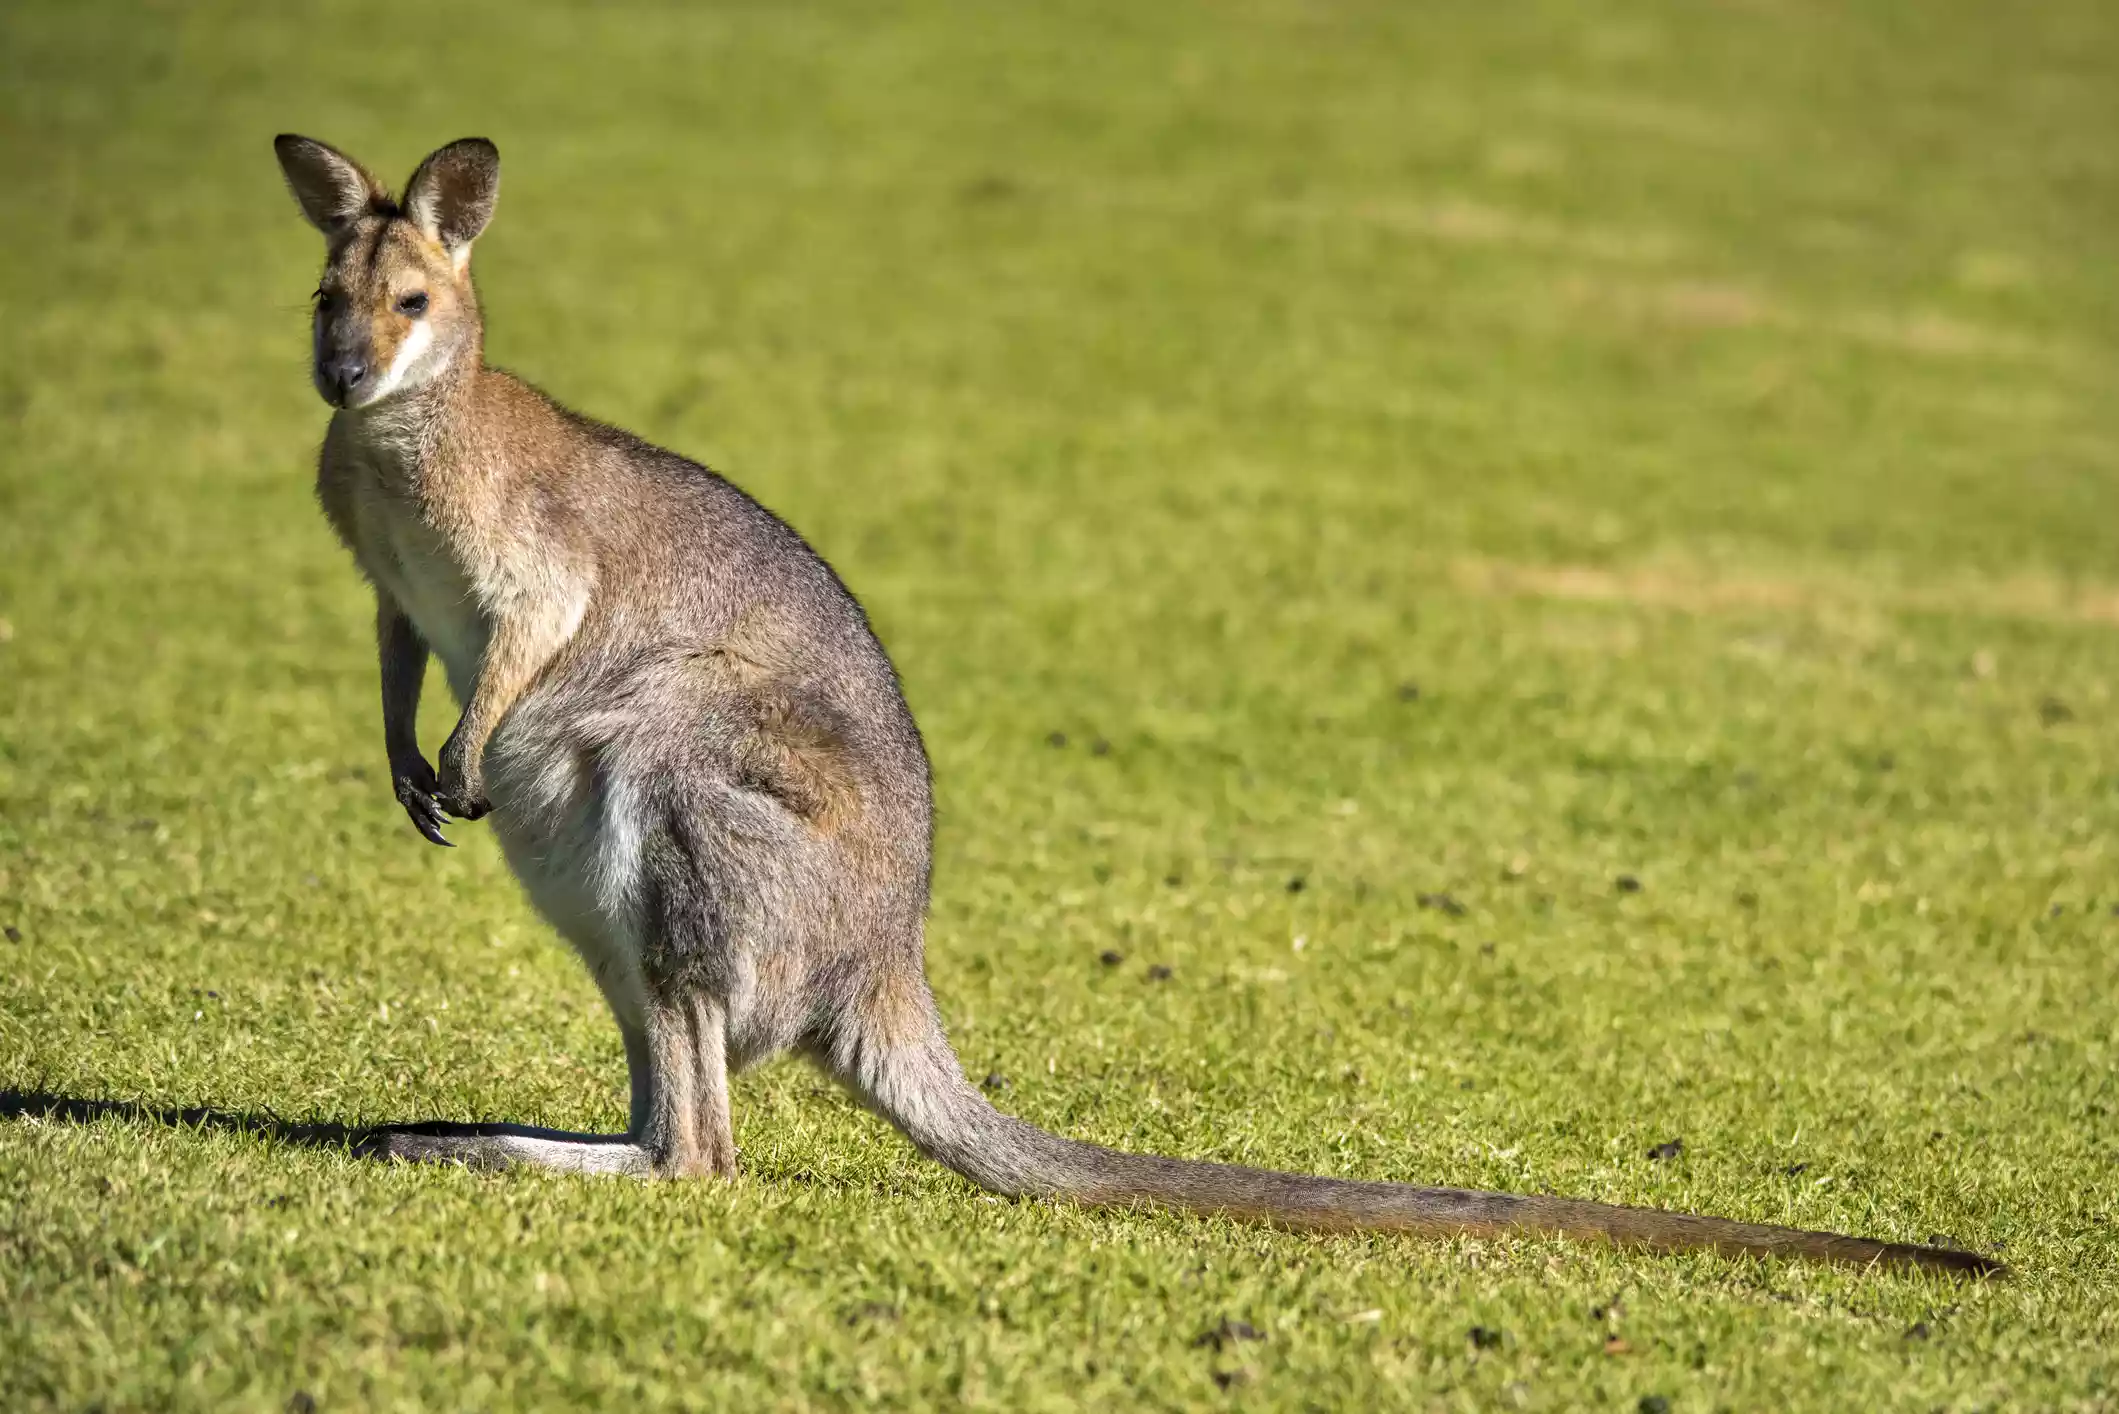 wallaby with long tail stands in sunlight